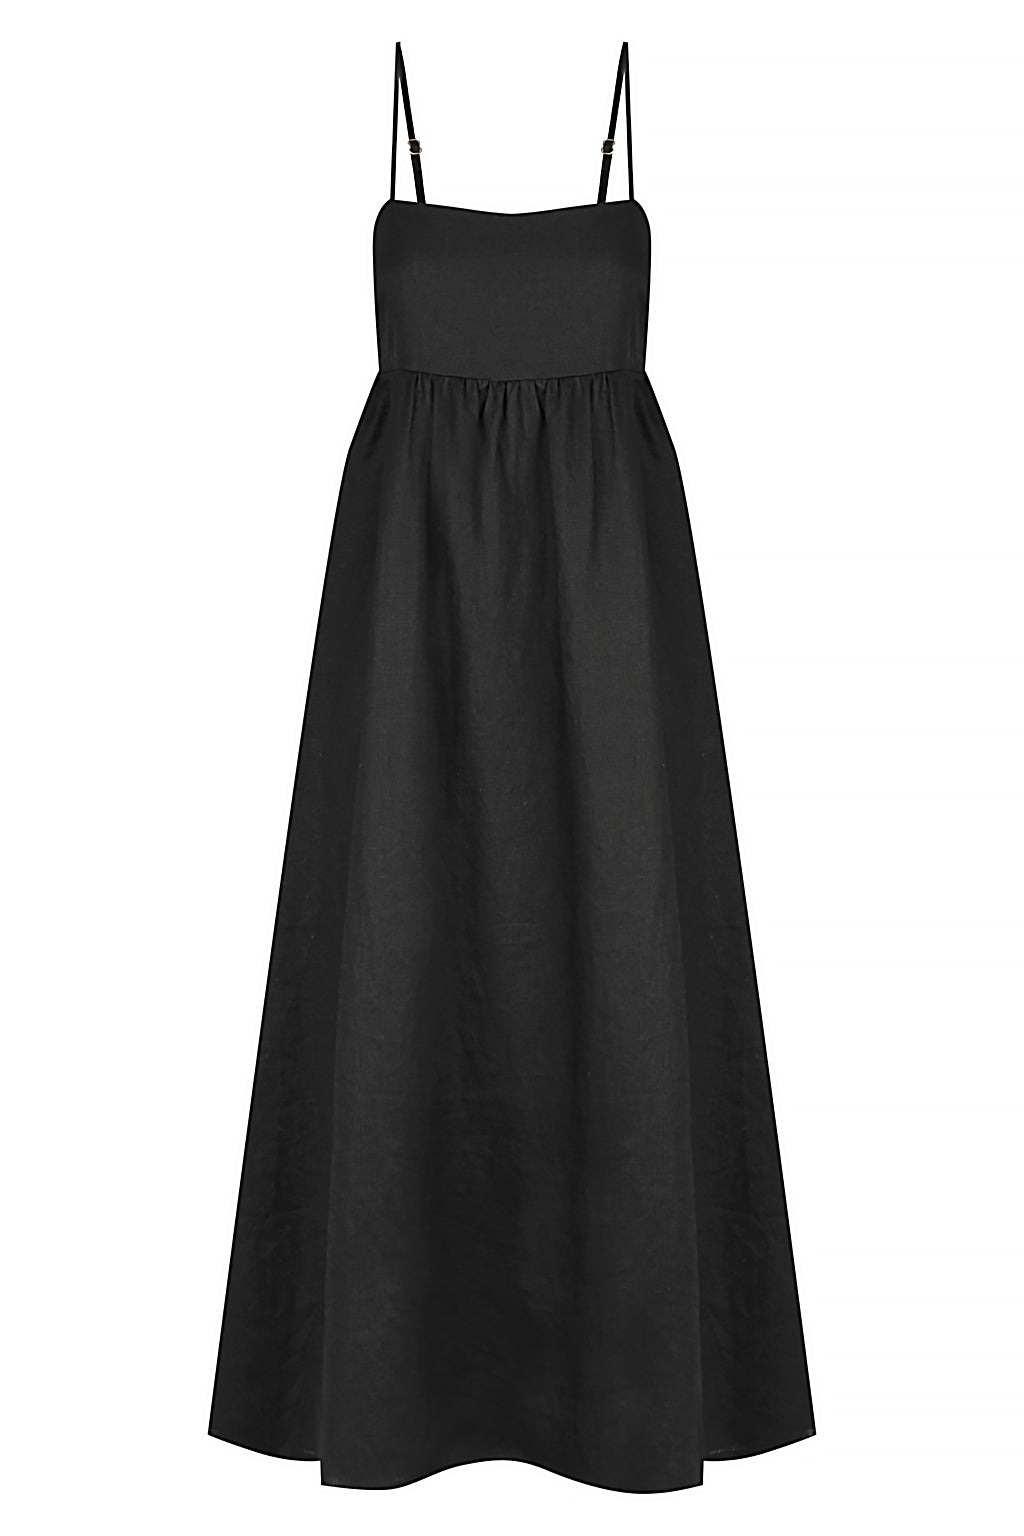 Bisk the Label Rory Black Linen Maxi Dress with Pockets